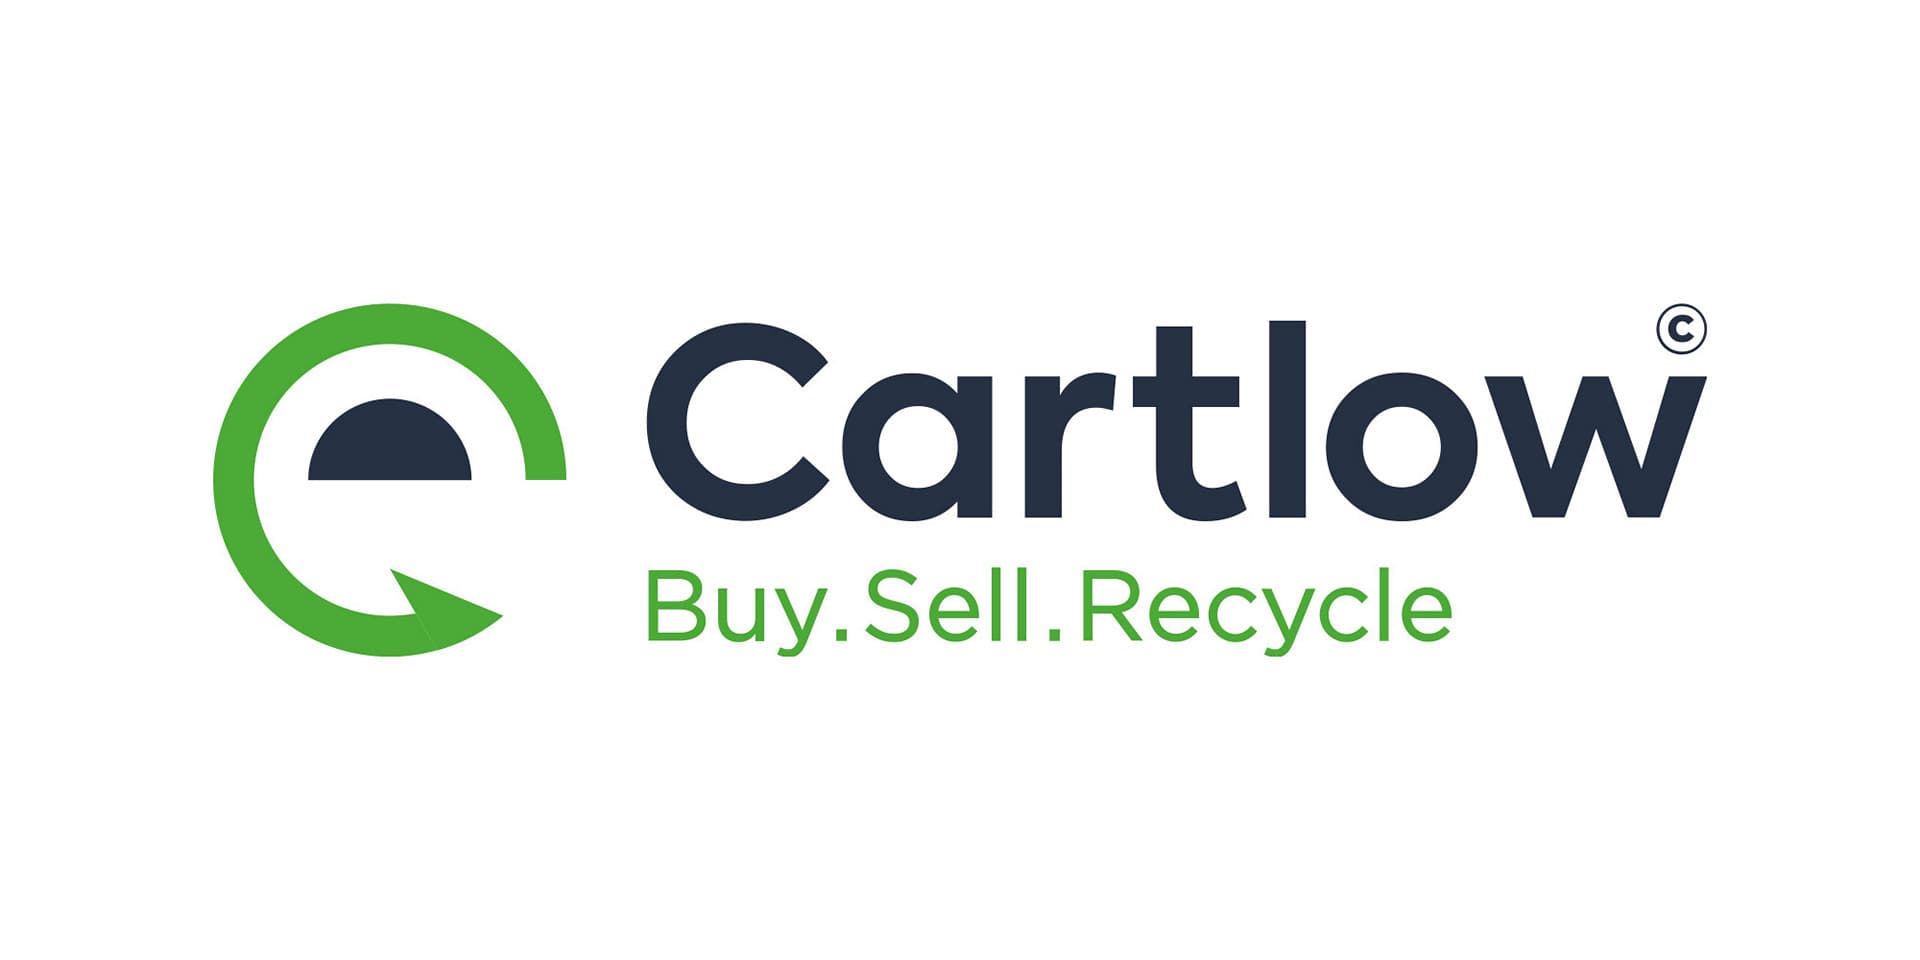 Cartlow, the regional reverse logistics platform, introduces a first-of-its-kind catalogue retail experience